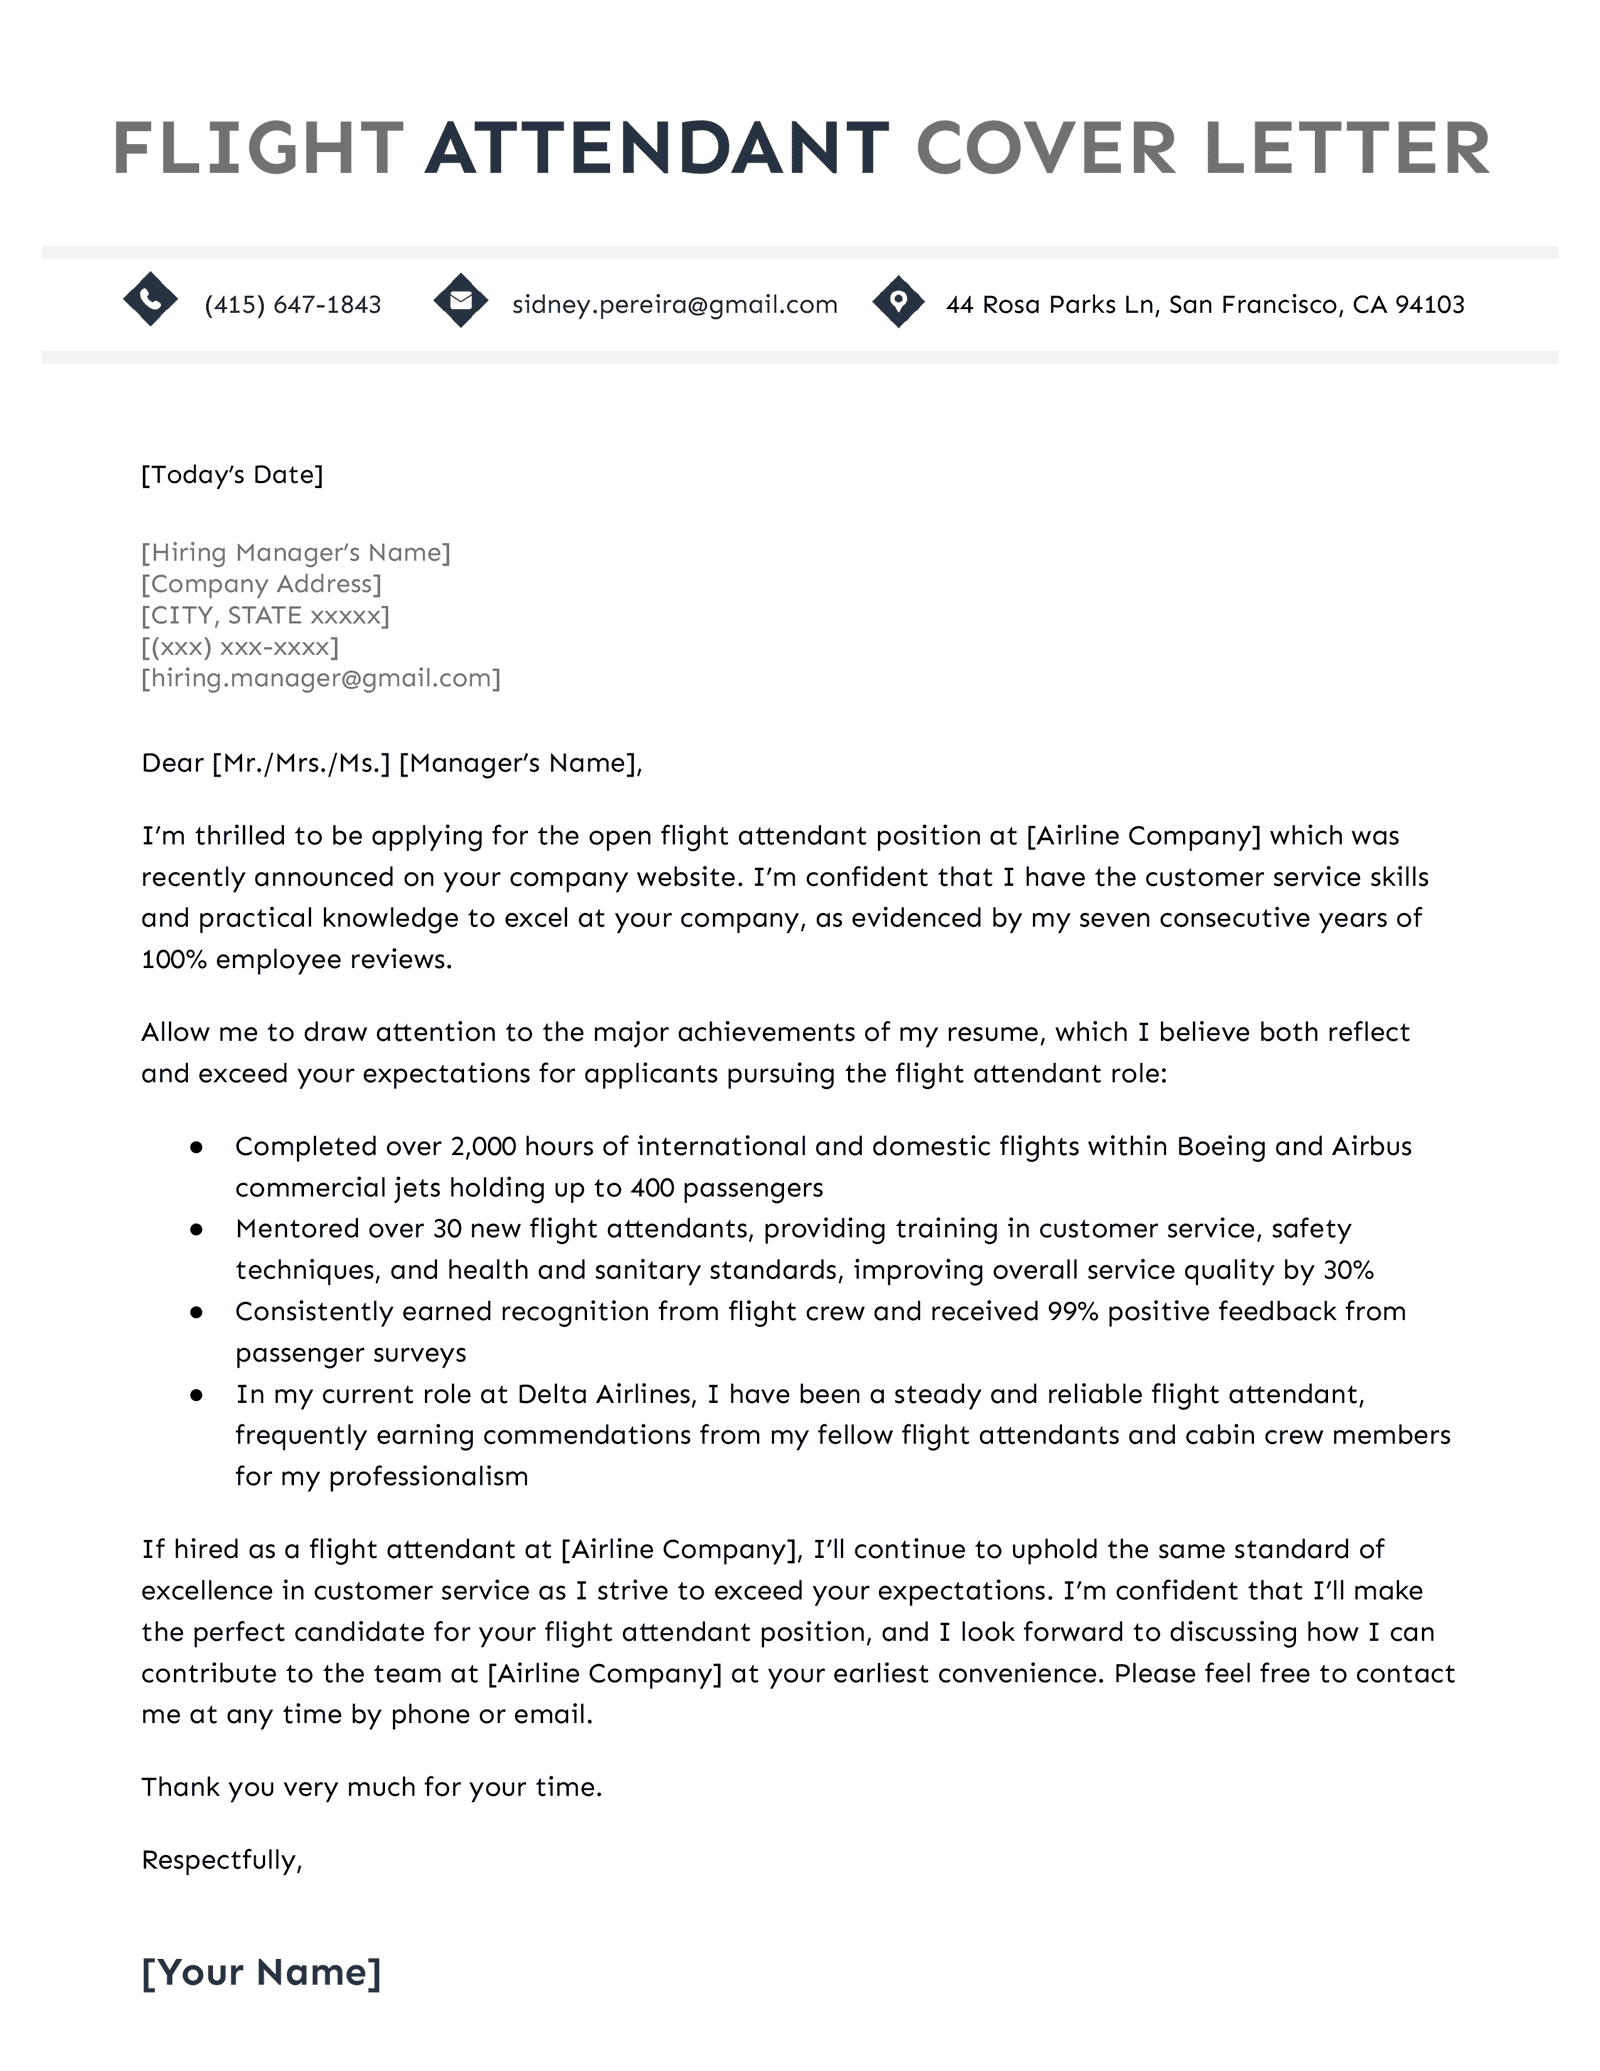 A flight attendant cover letter example with large, multi-colored text in the header to make the applicant stand out